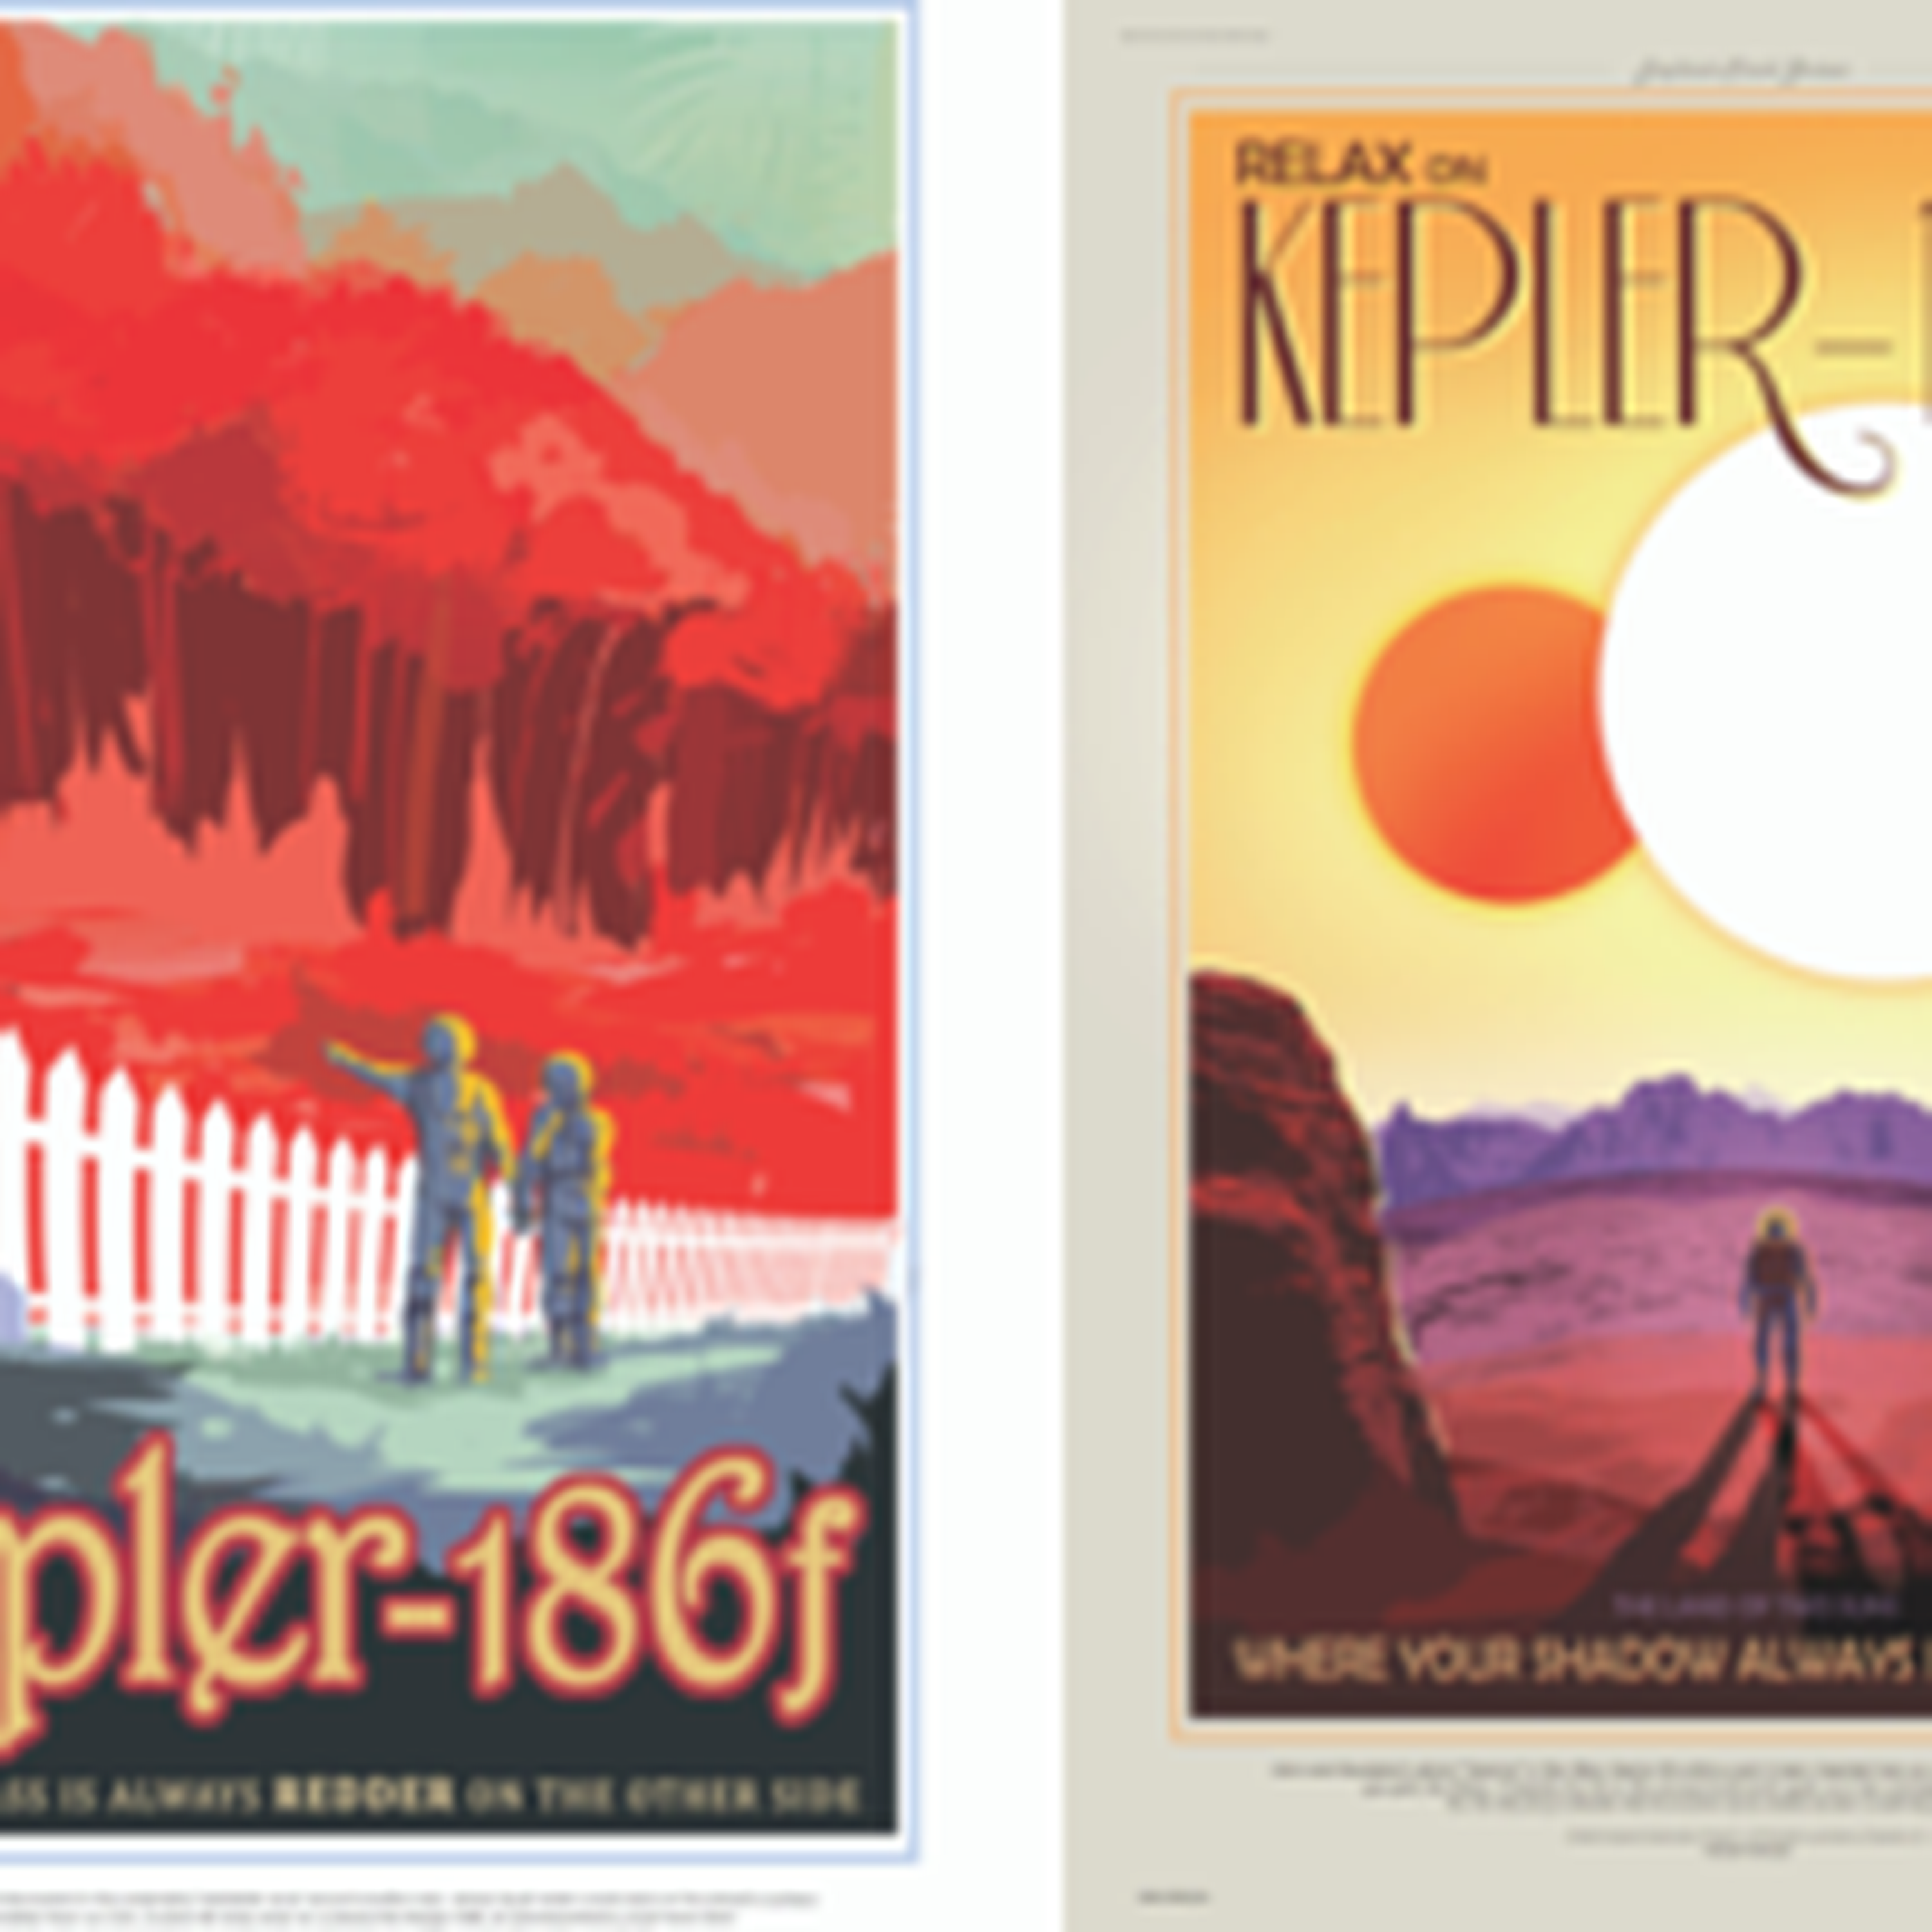 6: Space Nuts Ep.5 - Black holes, X-Rays & Radio Waves ...plus NASA Space Travel Posters